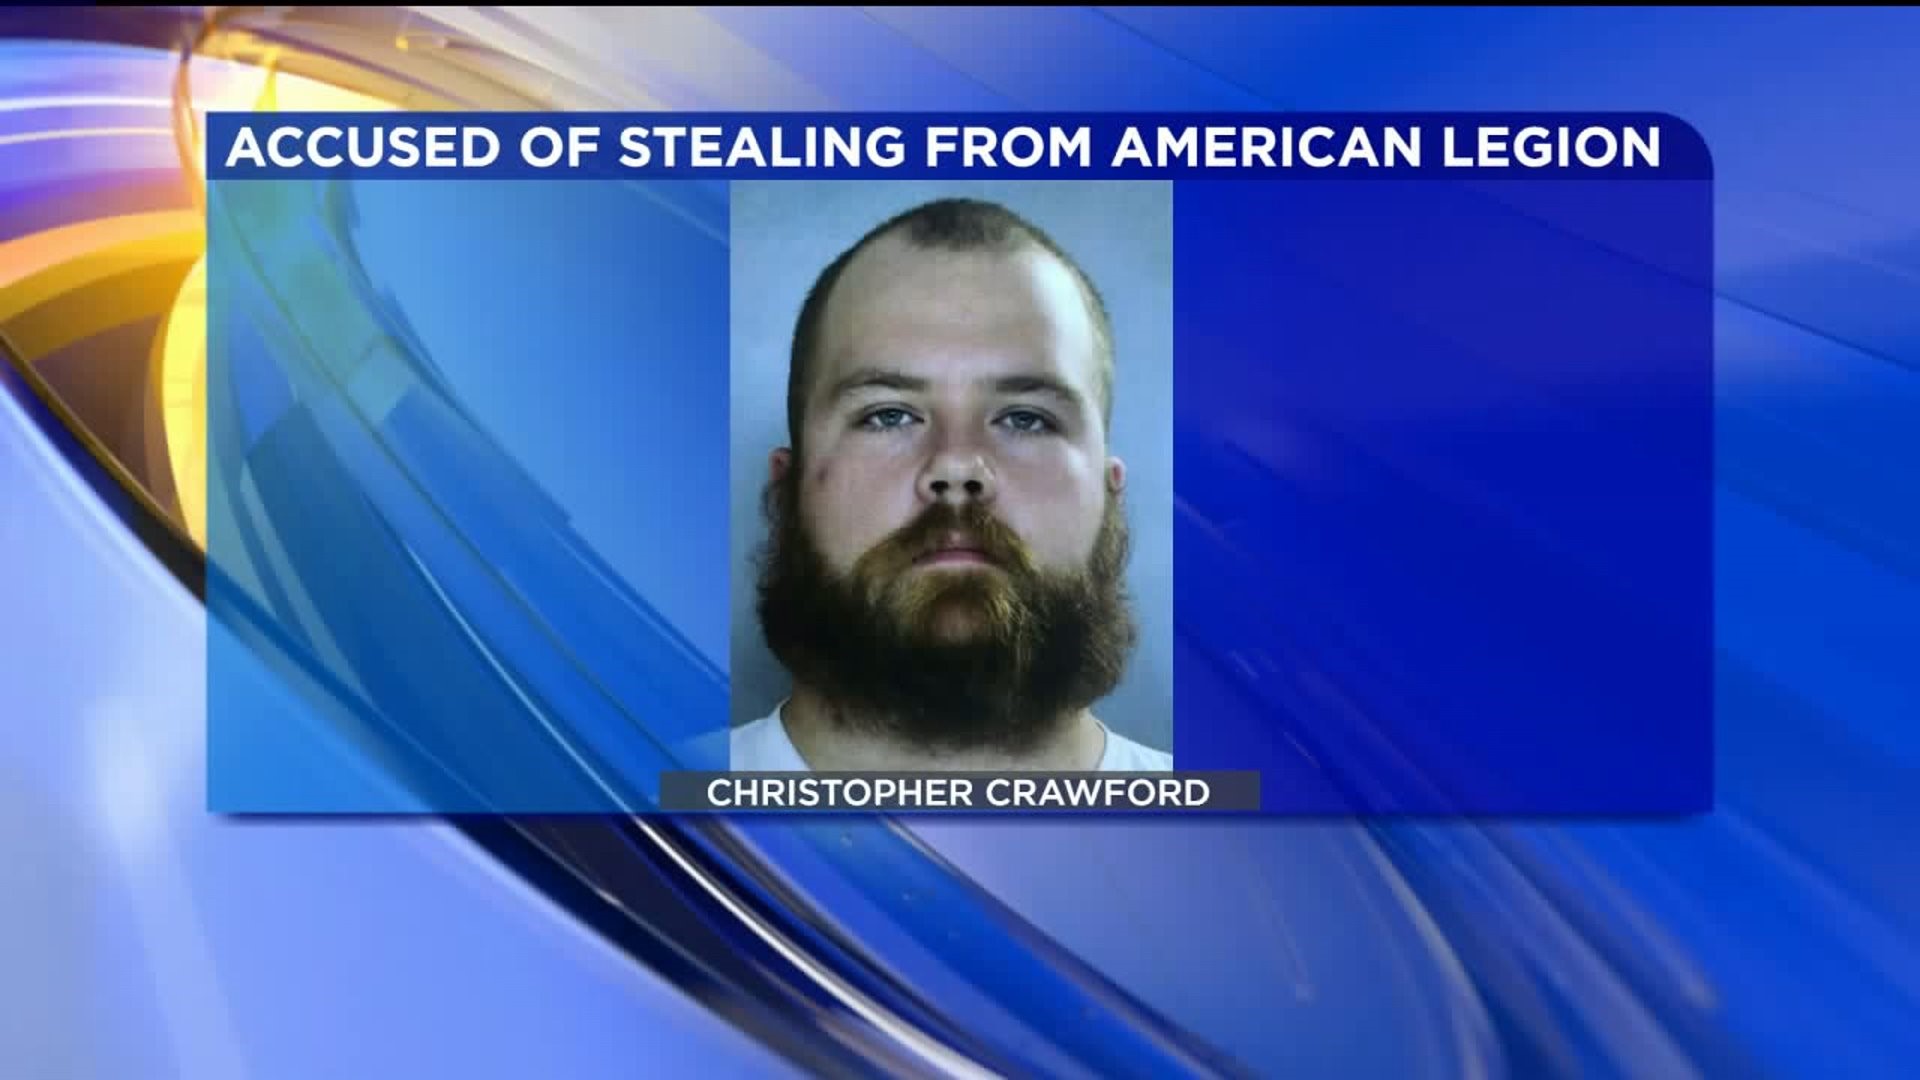 More Charges for Accused American Legion Thief